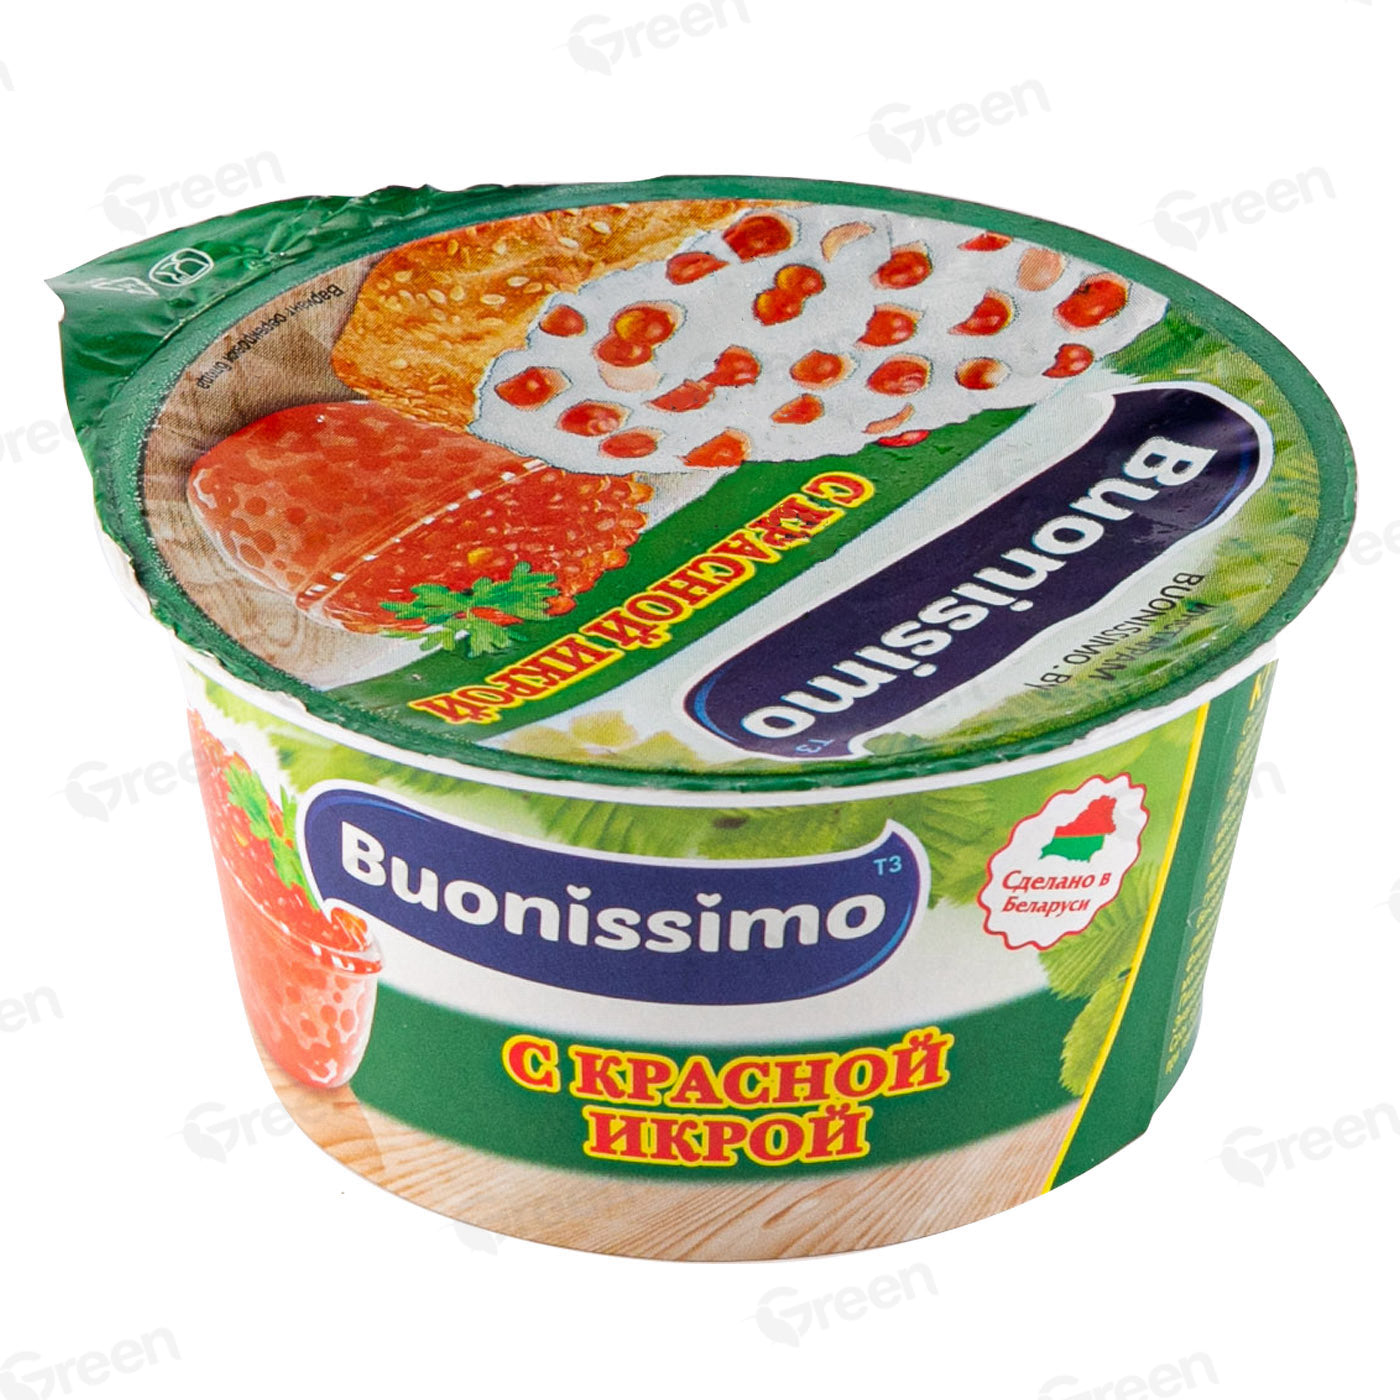 Buonissimo cream with cottage cheese and red caviar, 120g